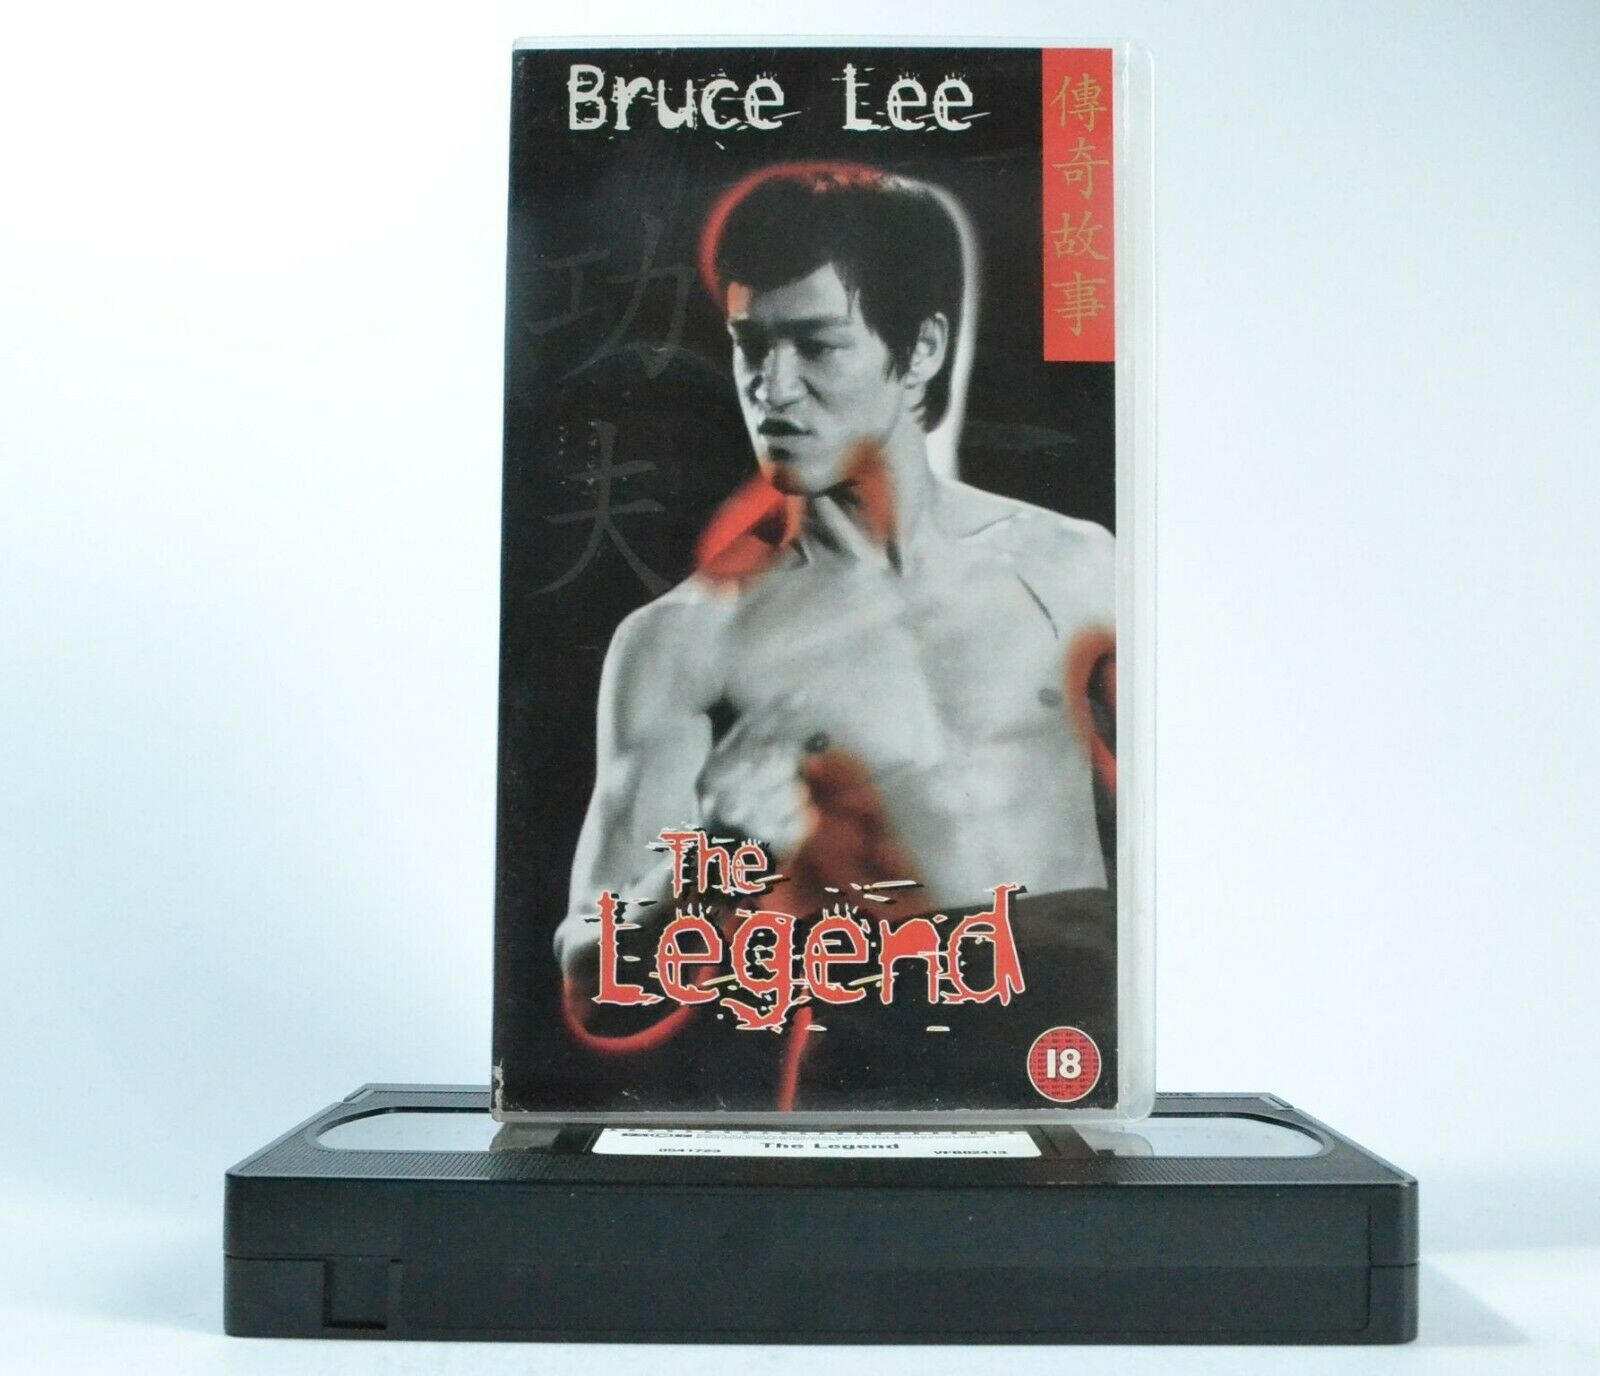 Bruce Lee: The Legend - (1997) 4 Front - Documentary - Martial Arts Hero - VHS-